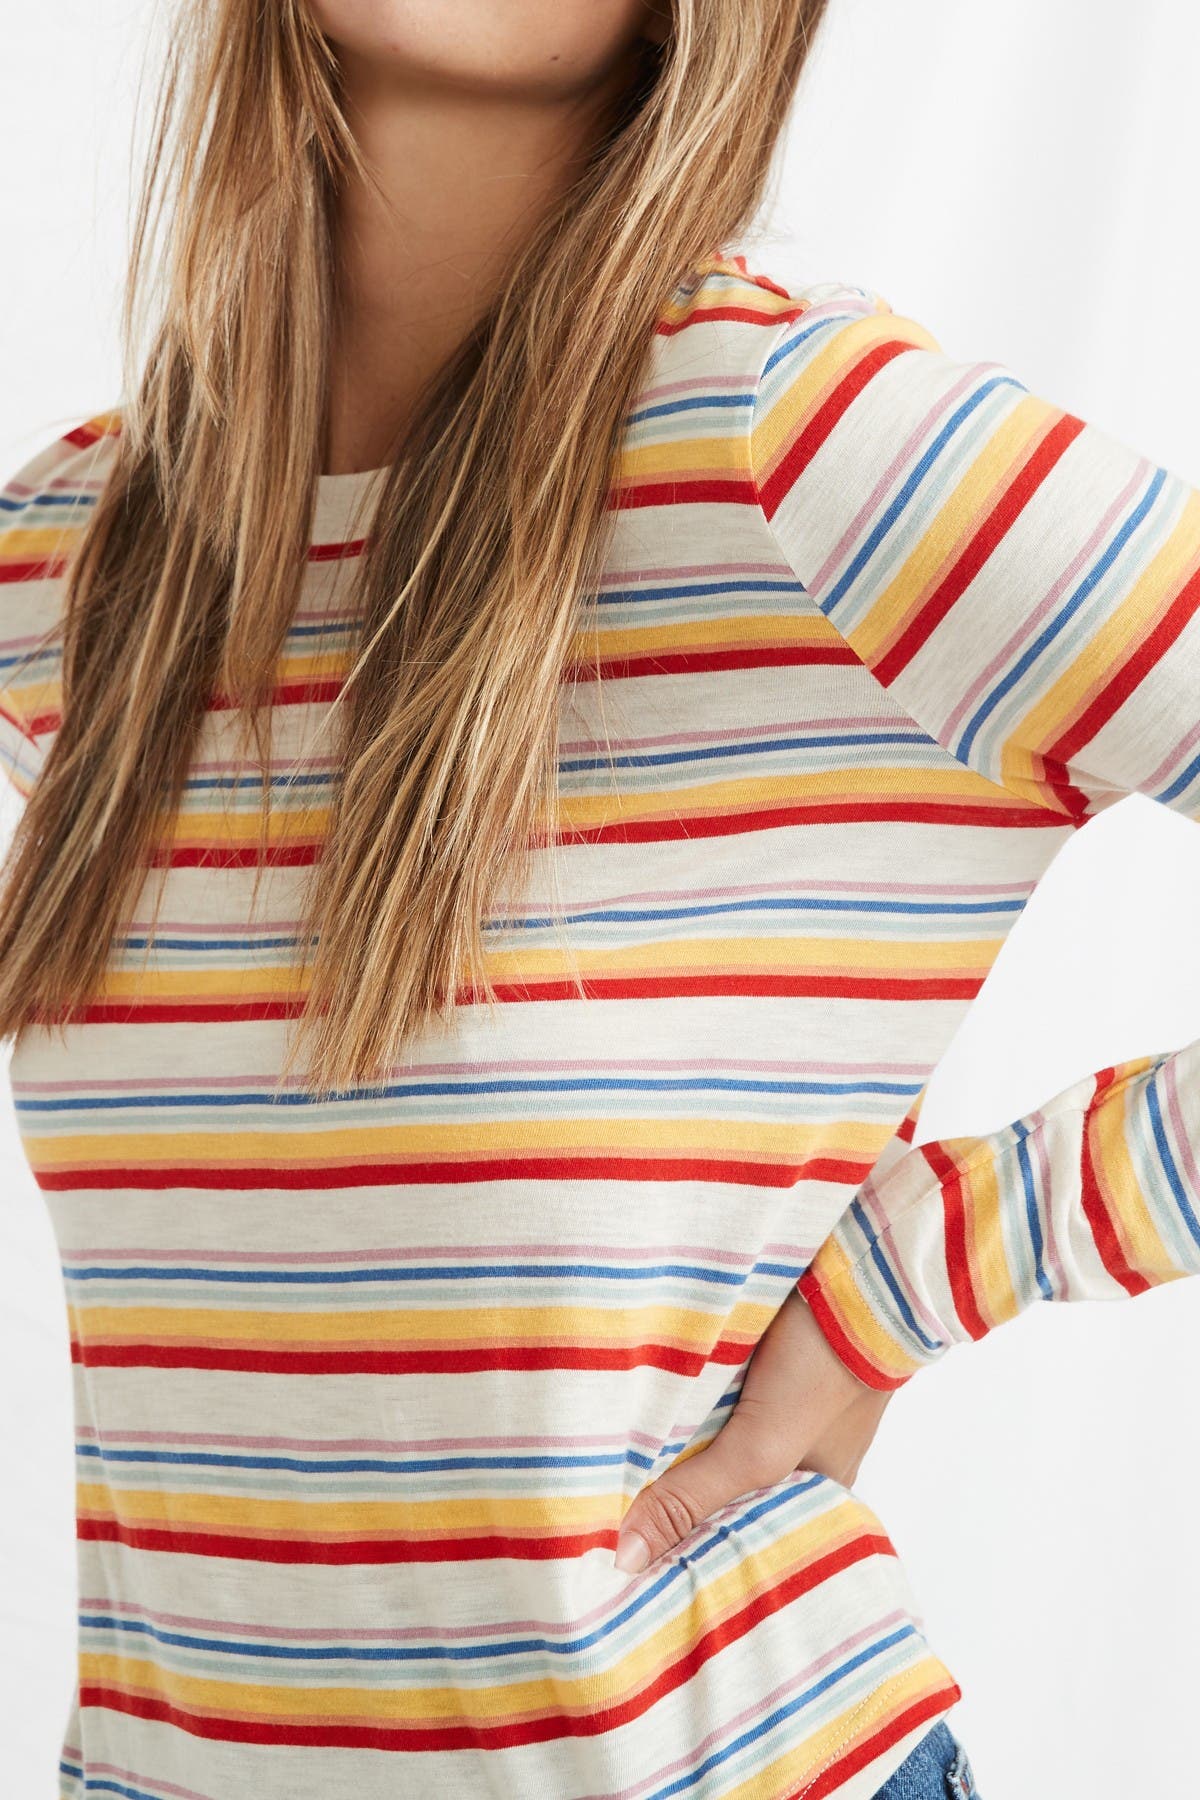 Marine Layer Ruca Stripe Long Sleeve T-shirt In Open Miscellaneous